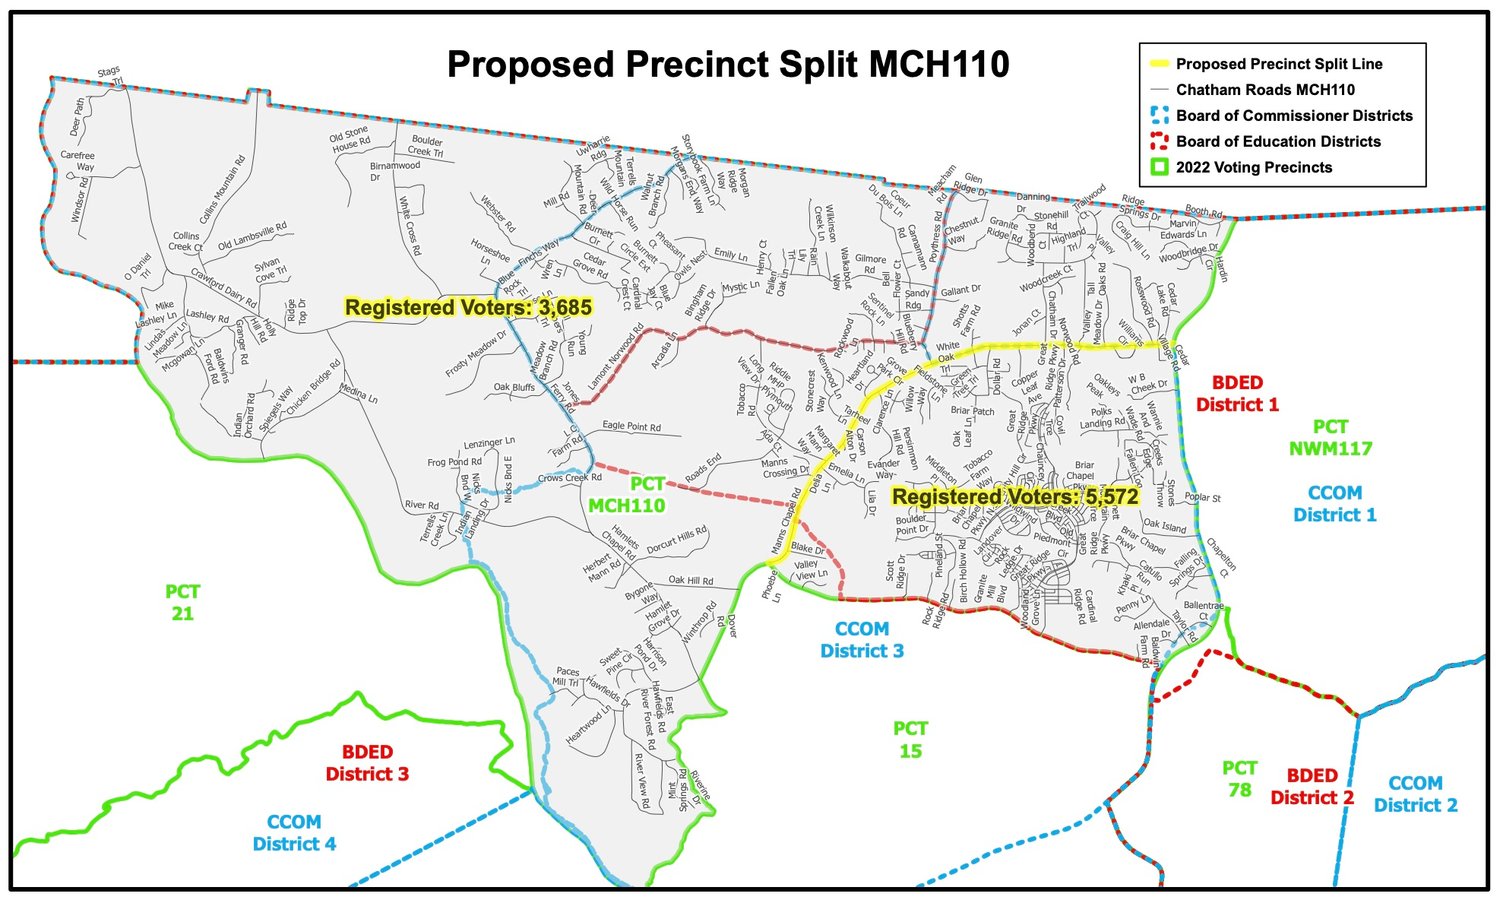 The Manns Chapel voting precinct is being split into two new smaller precincts, thanks to population growth in the area. Chatham's Board of Elections is seeking suggestions for names for both precincts.